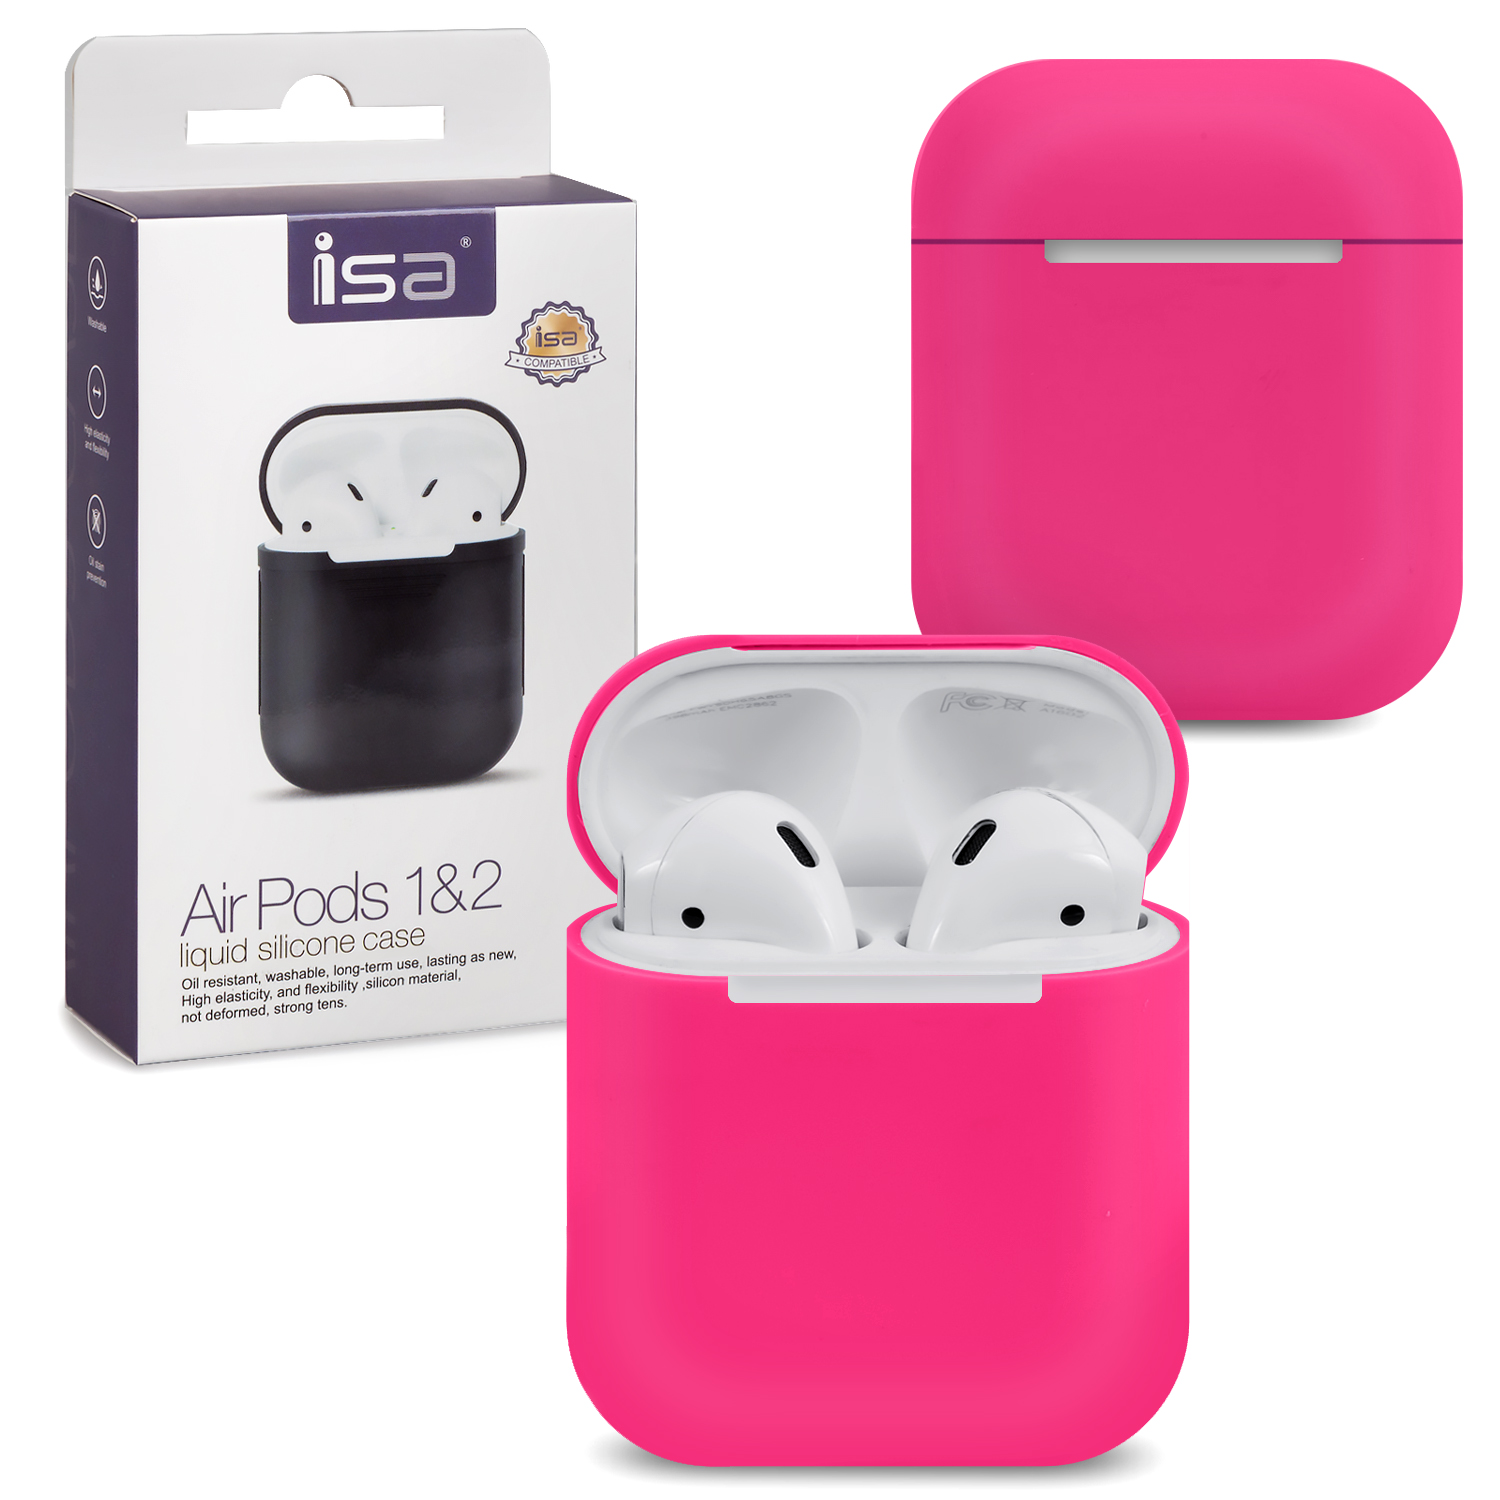 Чехол Apods Silicon Case 1/2 ISA Rose Pink